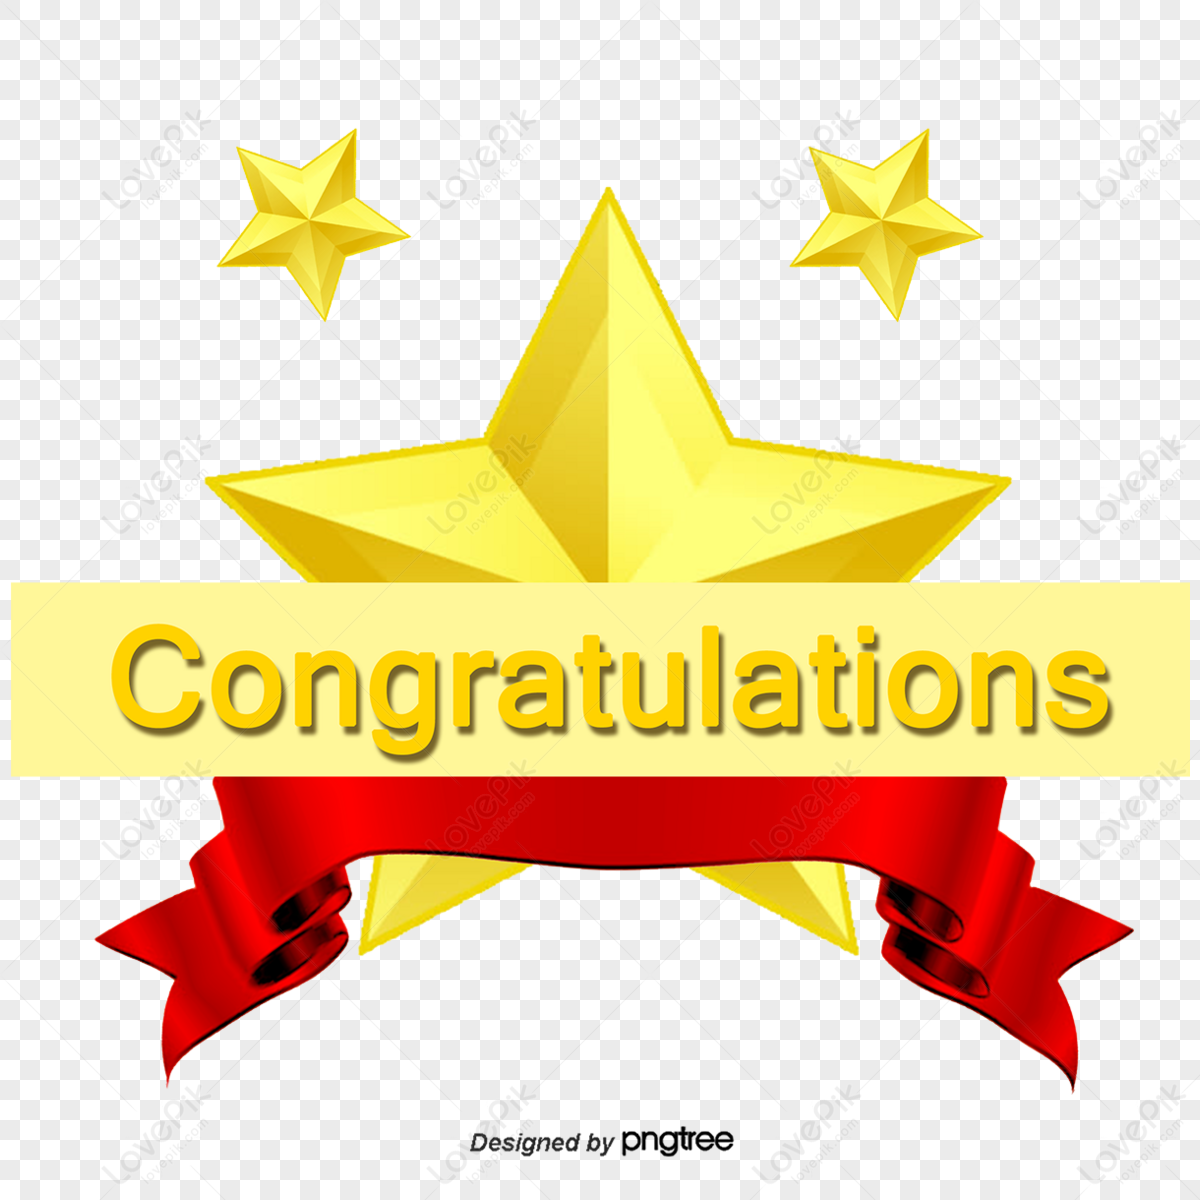 Congratulations Background Images, HD Pictures For Free Vectors Download -  Lovepik.com